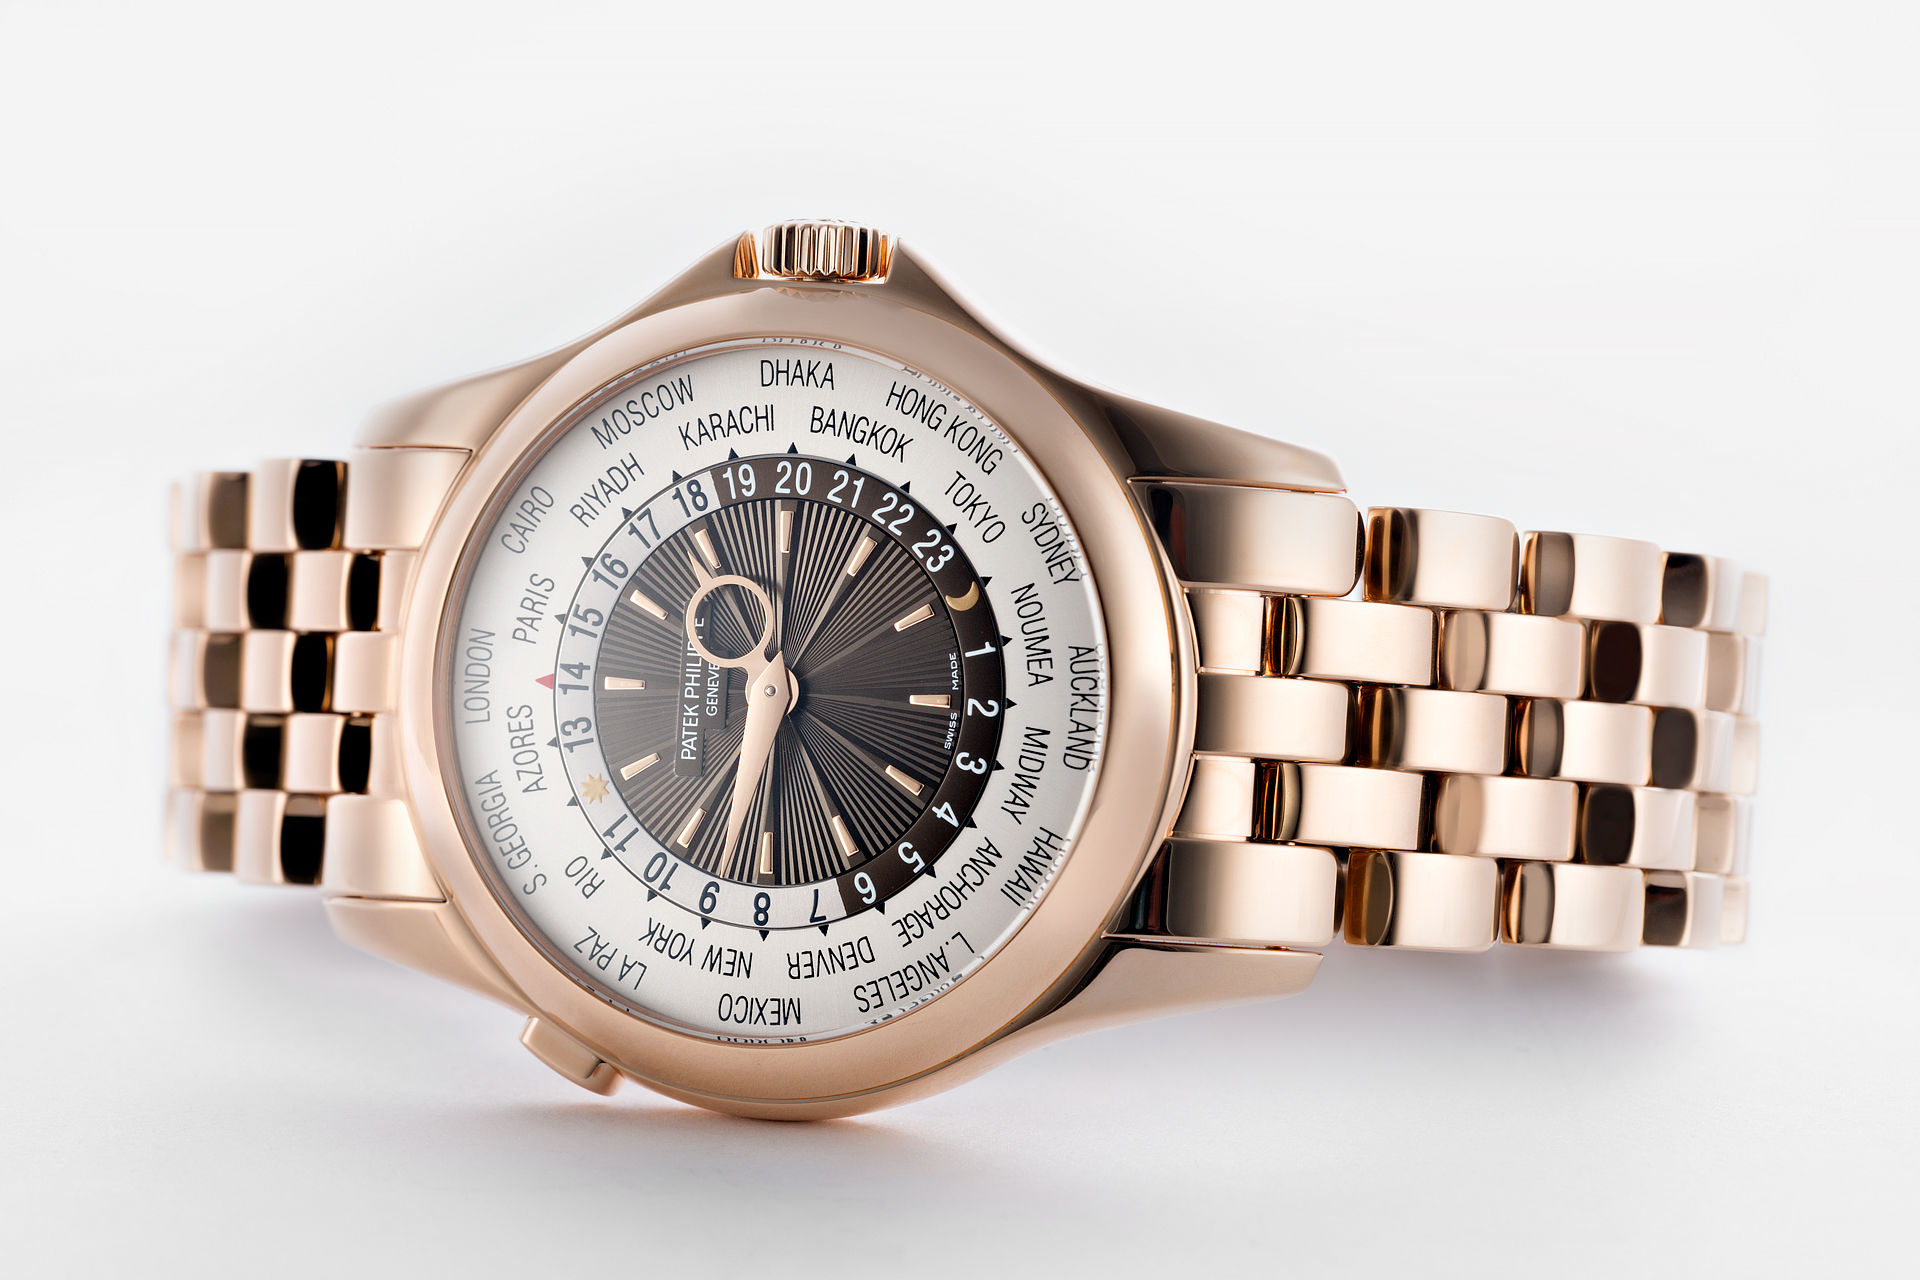 ref 5130R | 'Full Set' Immaculate | Patek Philippe World Time